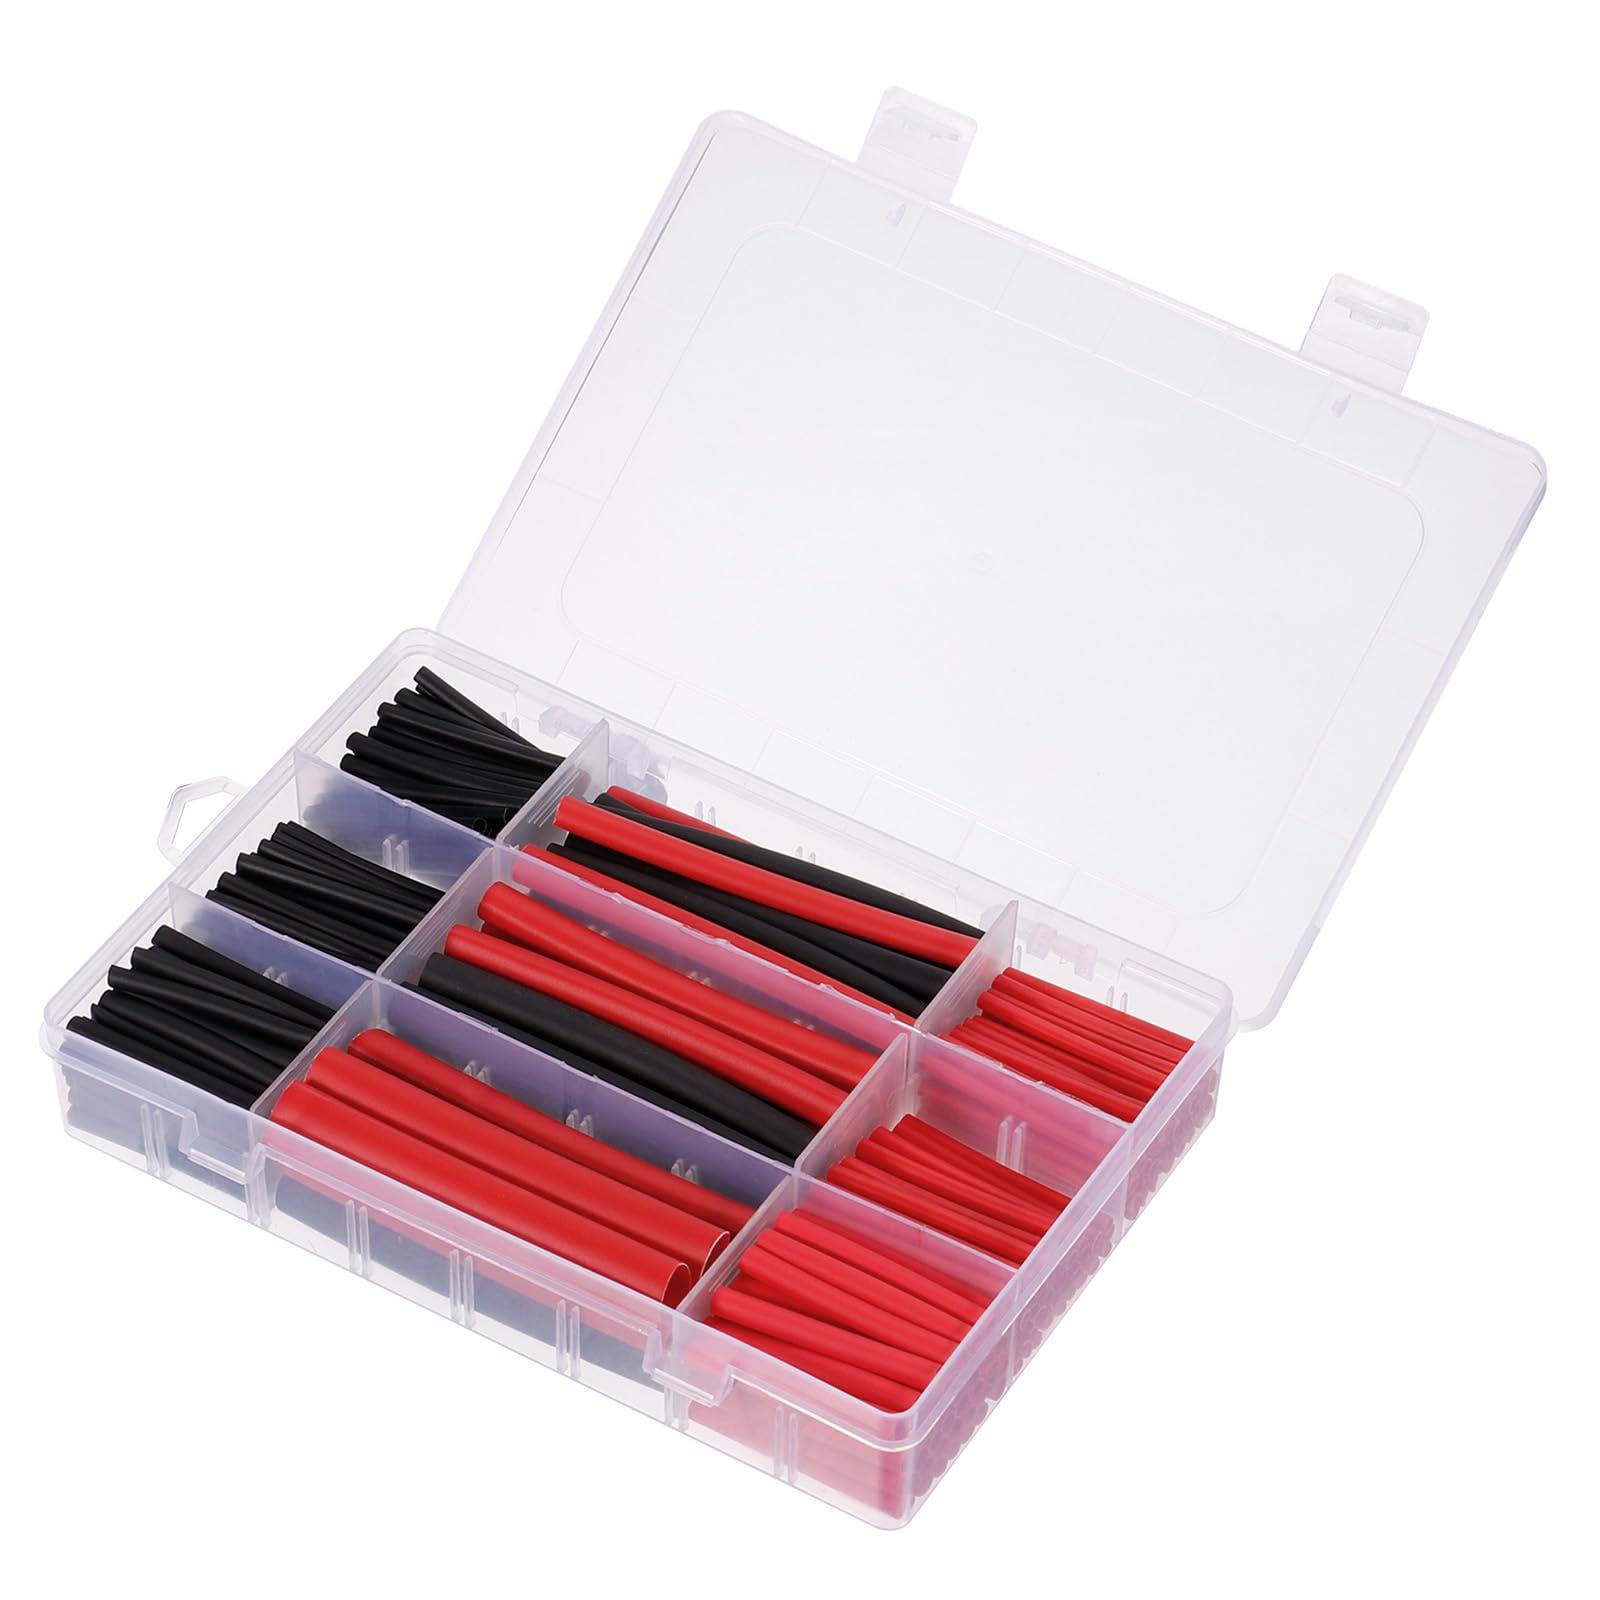 sourcing map 300pcs Heat Shrink Tubing Kit 3:1 Dual Wall Adhesive Heat Shrink Tube 1/8" 3/16" 1/4" 3/8" for Electrical Cable Wire Wrap 5 Size